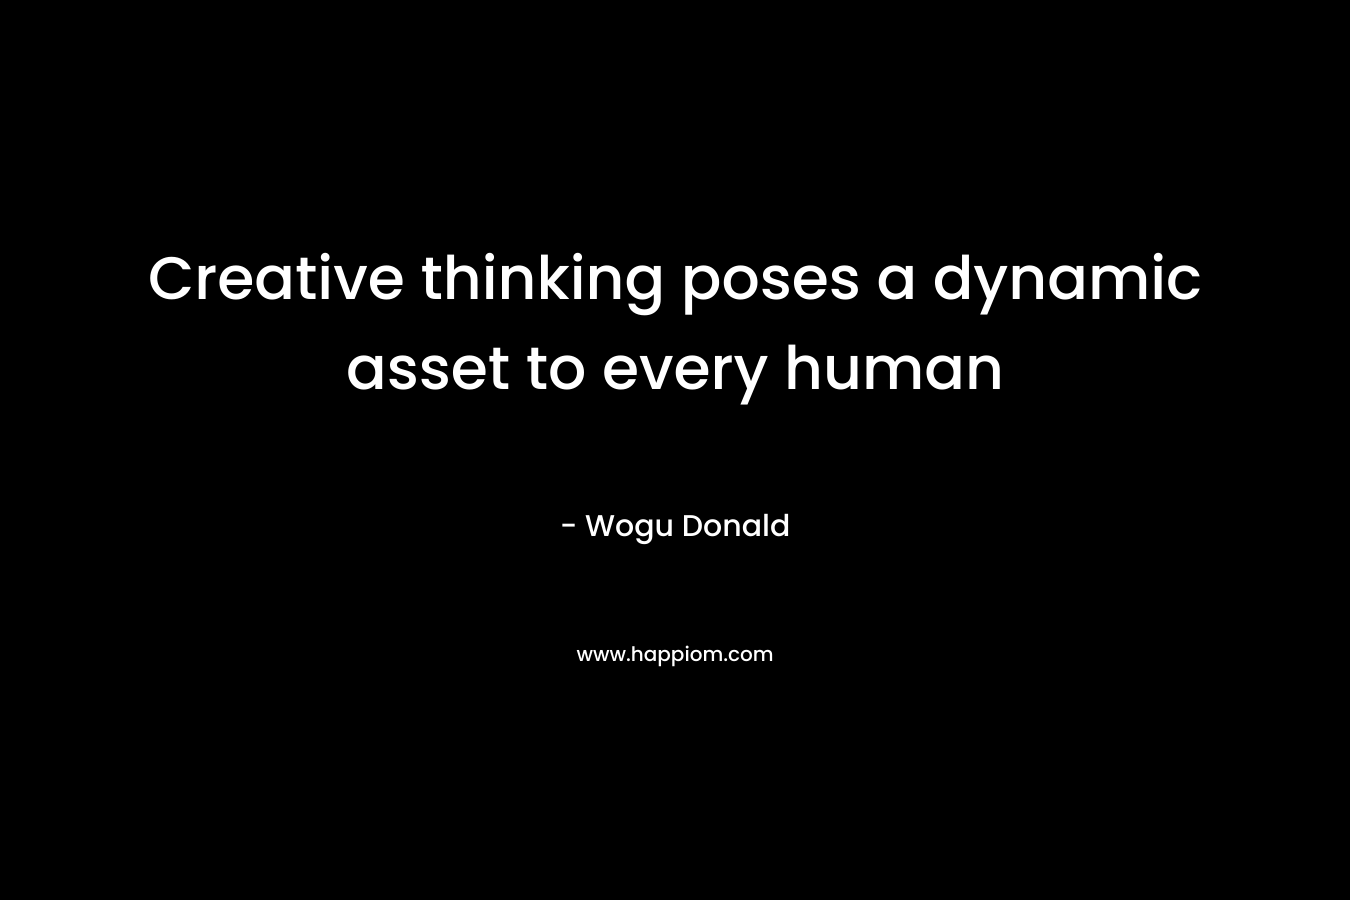 Creative thinking poses a dynamic asset to every human – Wogu Donald